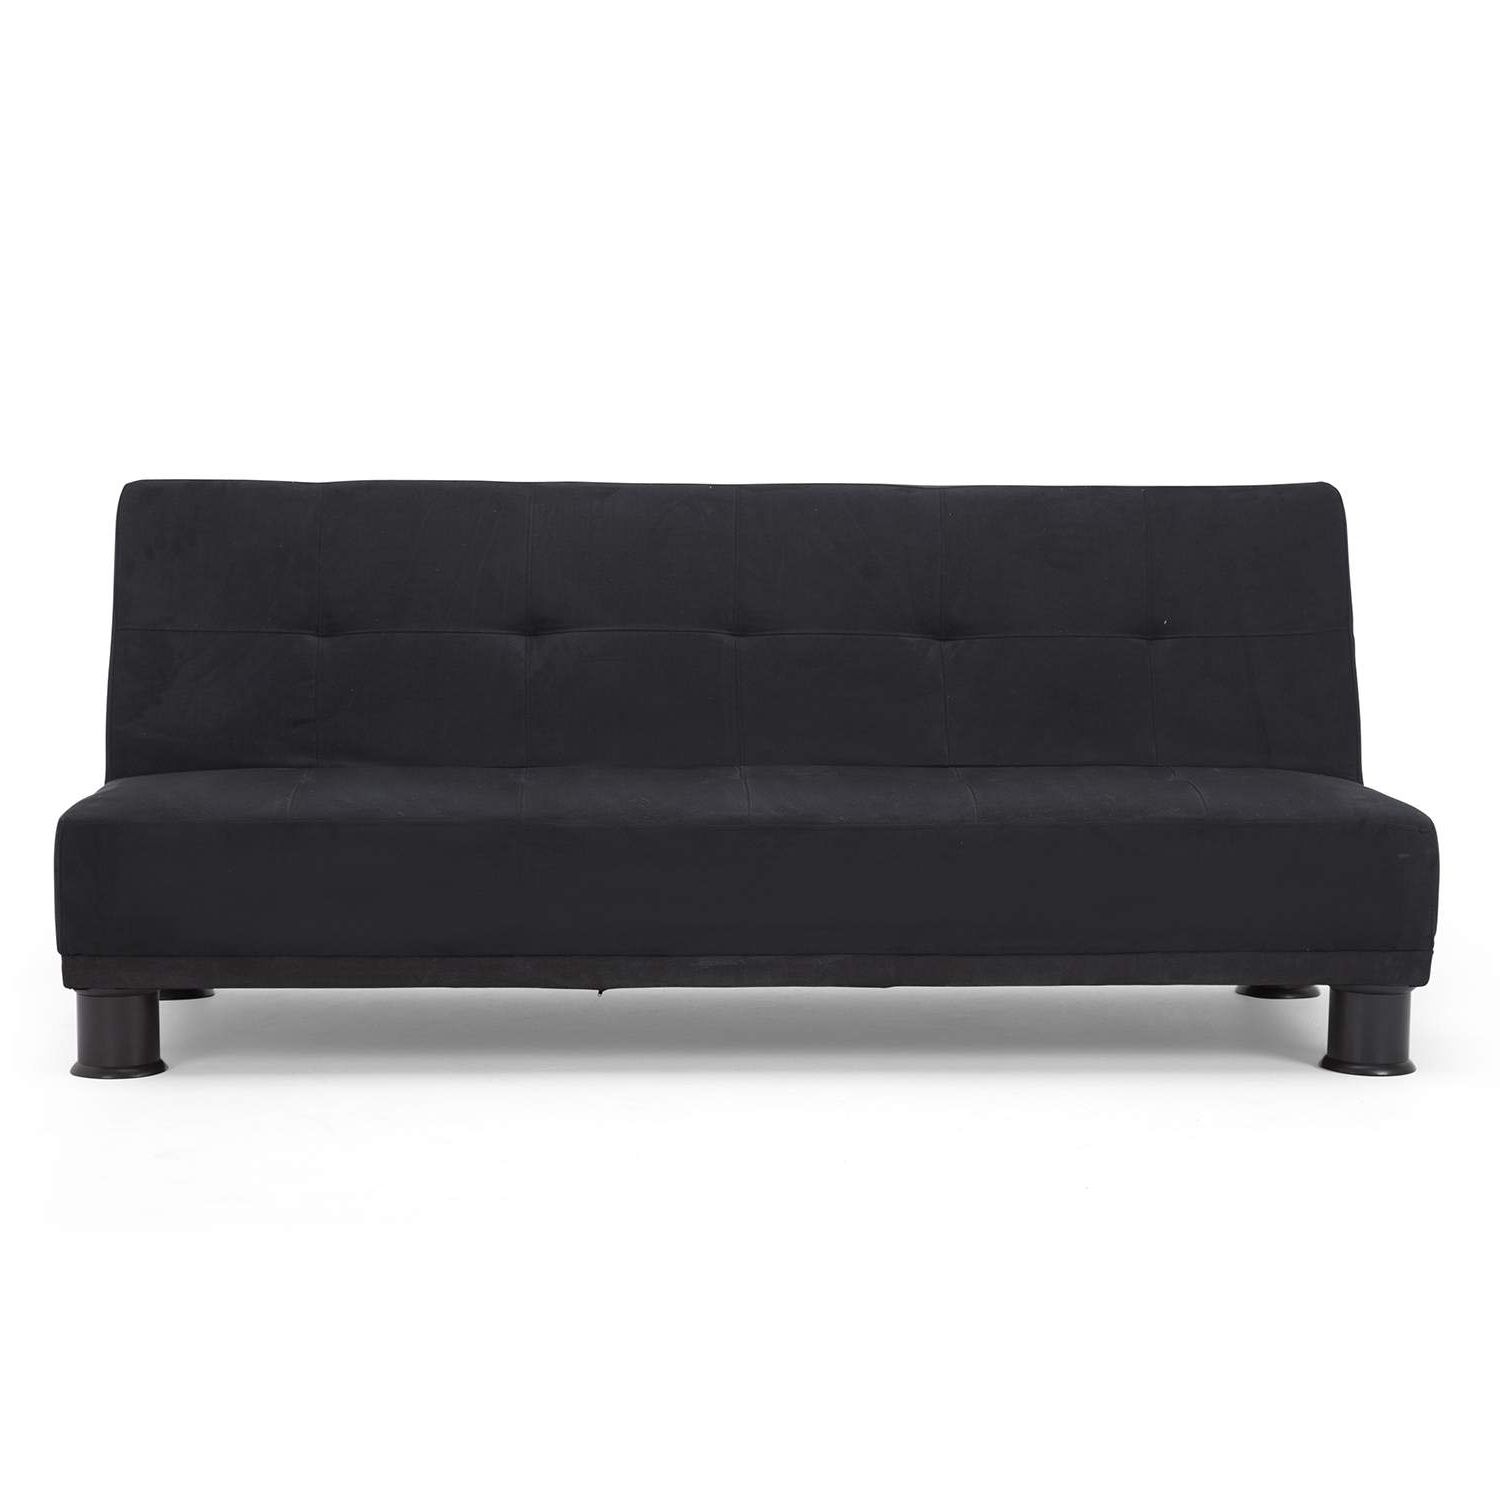 Well Known Ismi Faux Suede Sofa Bed – Next Day Delivery Ismi Faux Suede Sofa Bed For Faux Suede Sofas (View 11 of 15)